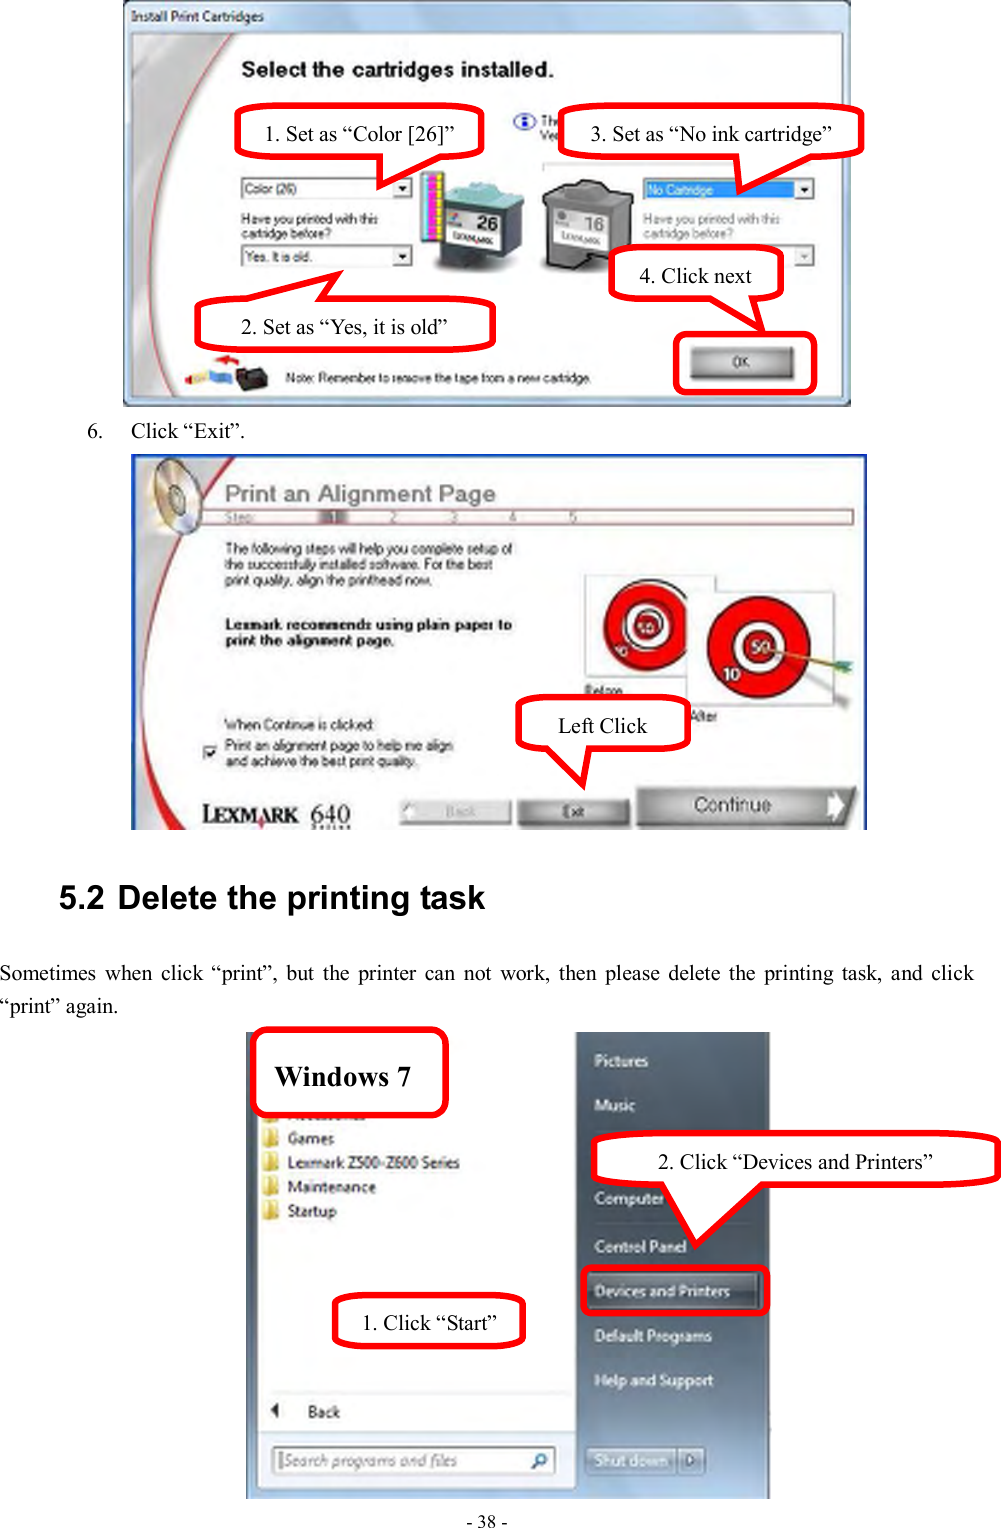  - 38 -  6. Click “Exit”.  5.2 Delete the printing task Sometimes  when  click  “print”,  but  the  printer  can  not  work,  then  please  delete  the  printing  task,  and  click “print” again.  Left Click 1. Click “Start” 2. Click “Devices and Printers” Windows 7 1. Set as “Color [26]” 2. Set as “Yes, it is old” 3. Set as “No ink cartridge” 4. Click next 